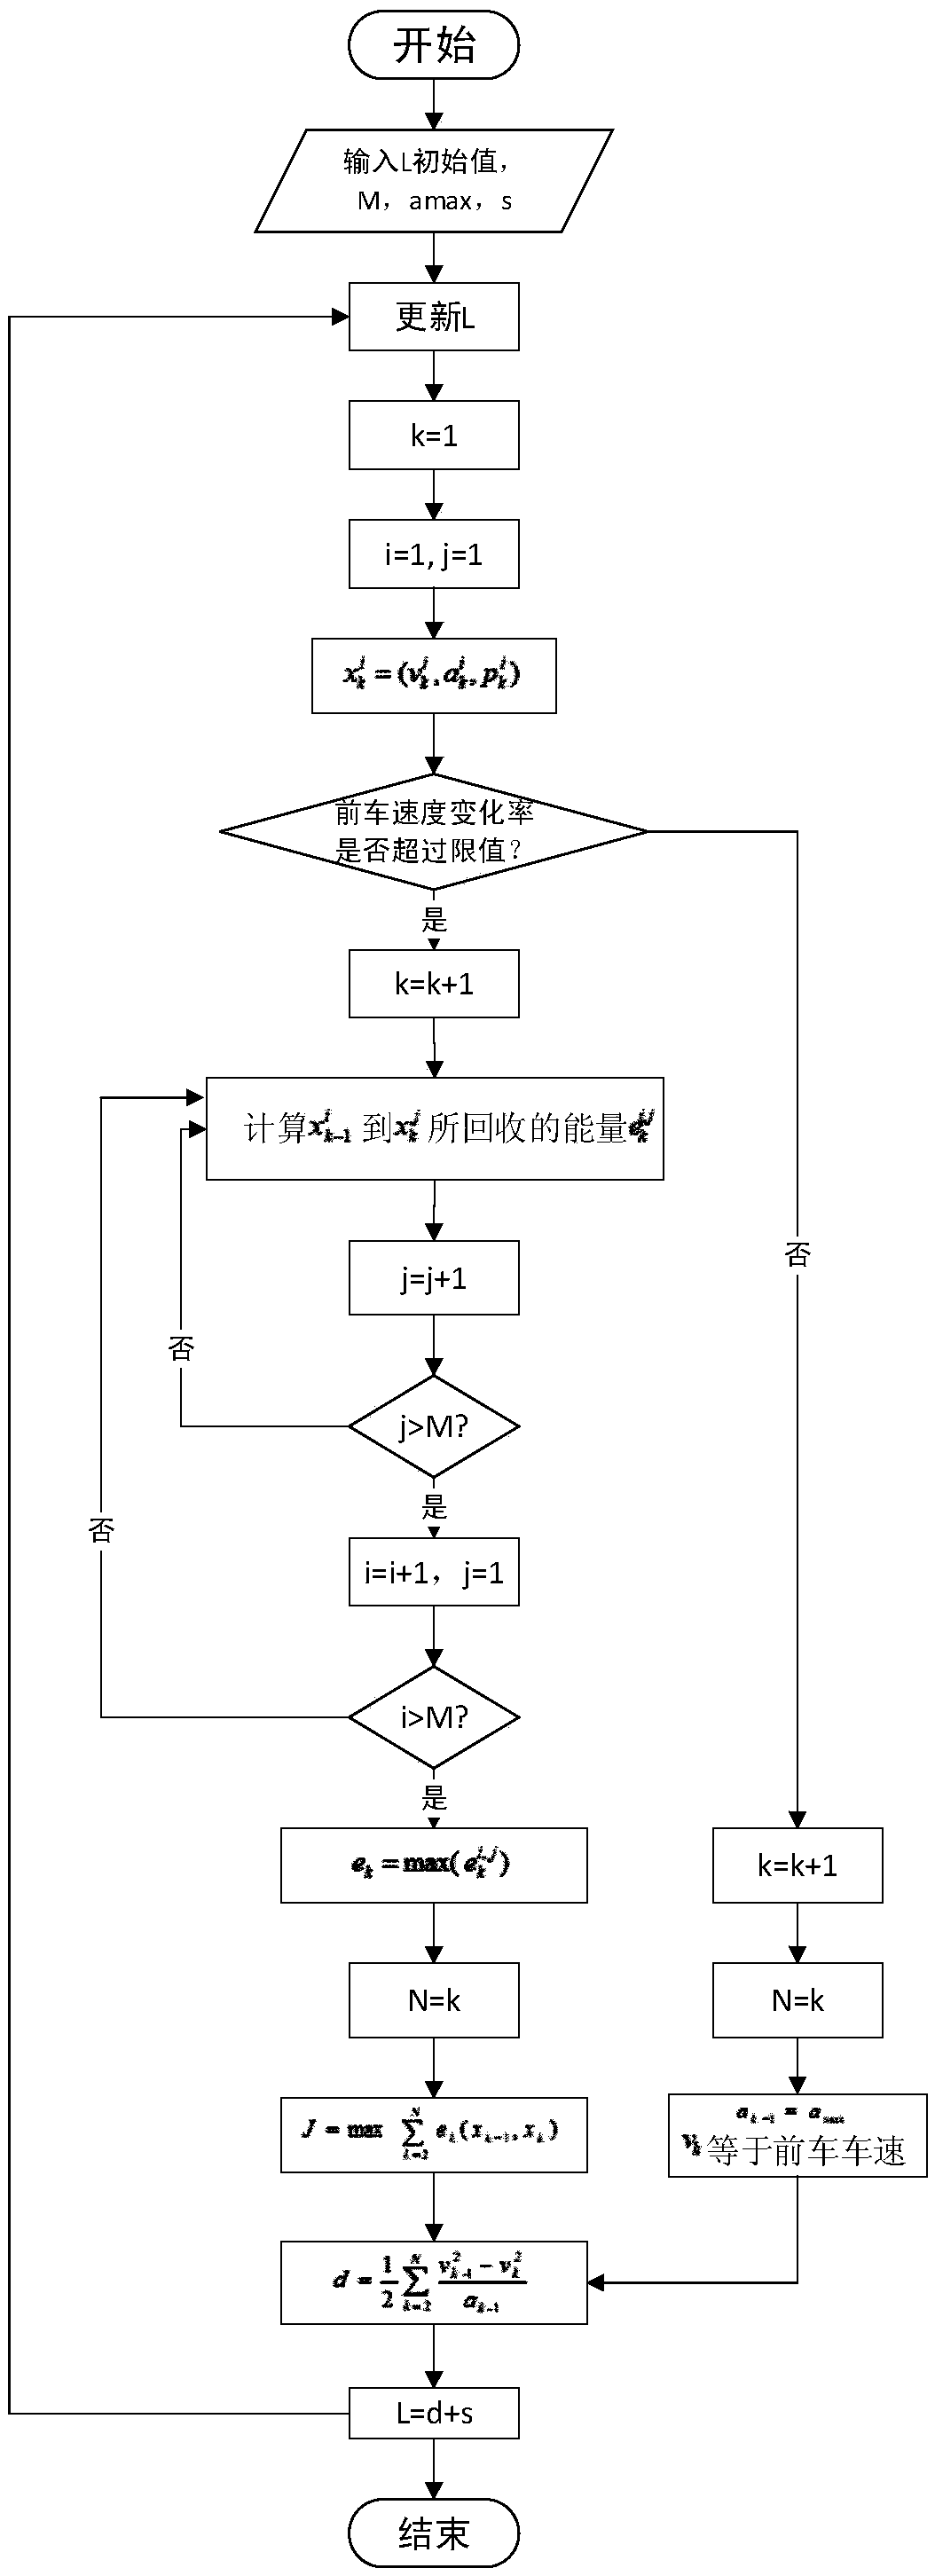 Self-adaptive cruise control system and self-adaptive cruise control system method for electric automobile based on car networking